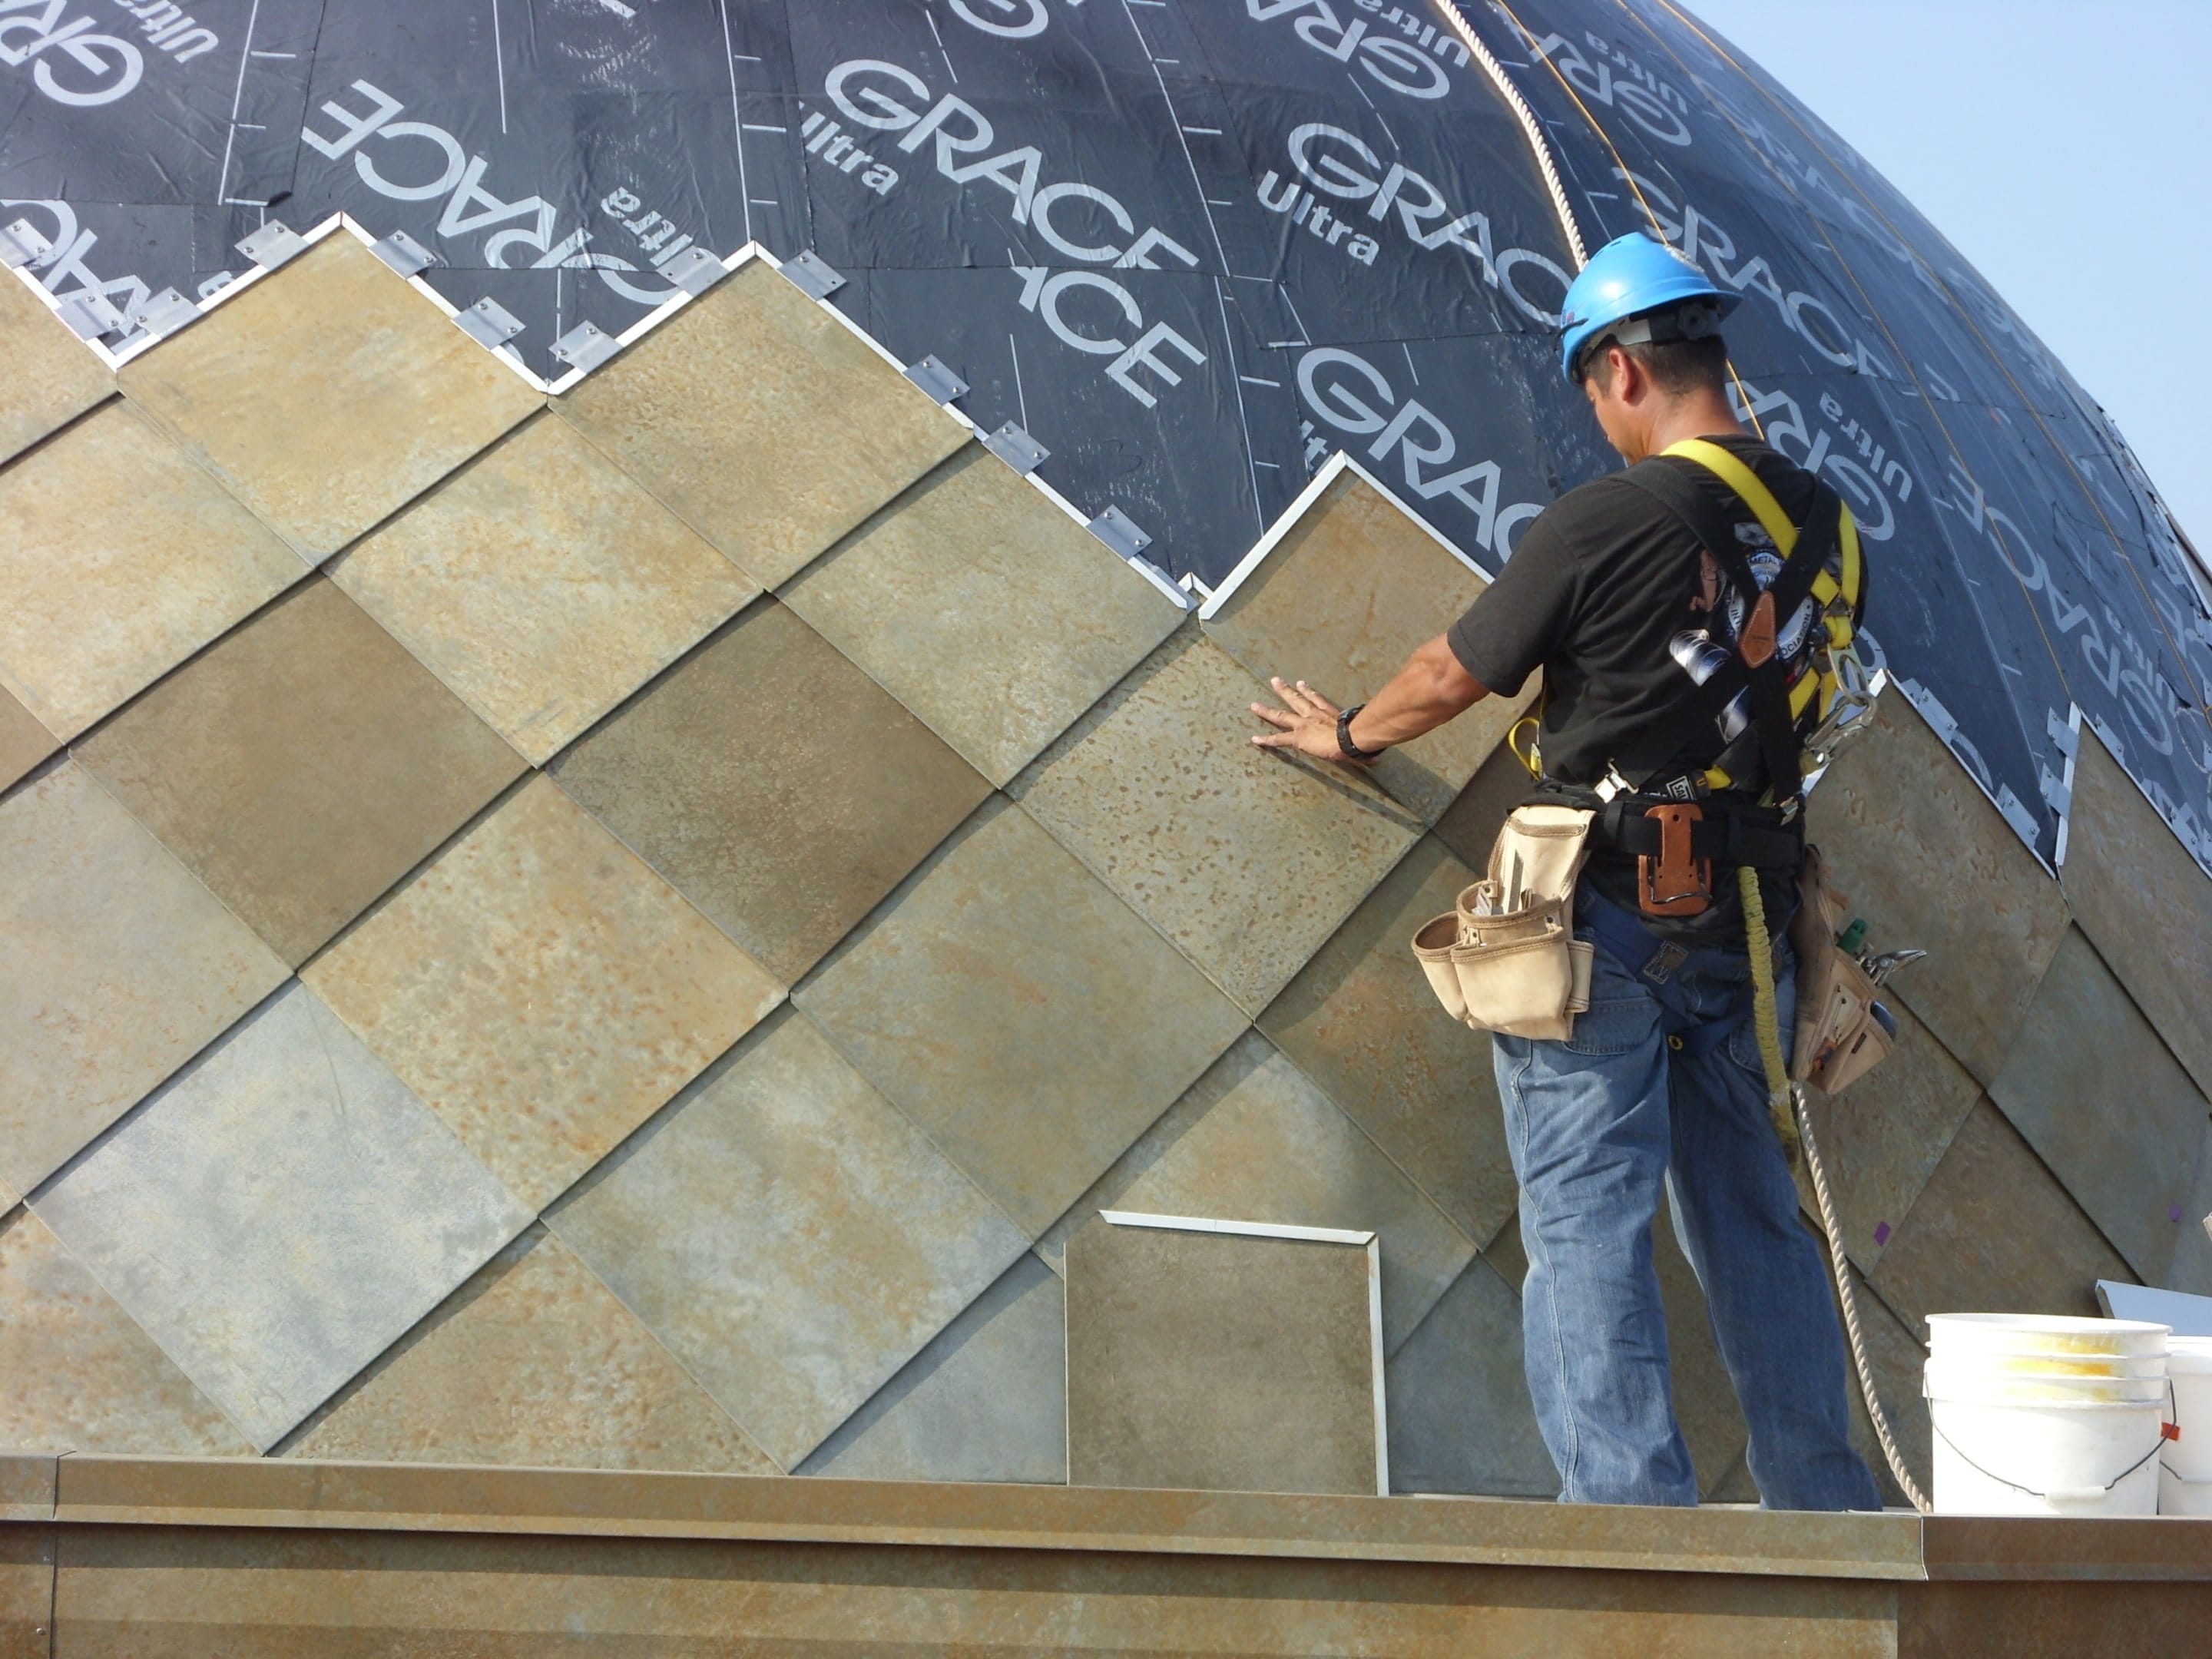 Flat Seam Install on the Plaza Dome in Kansas City, MO